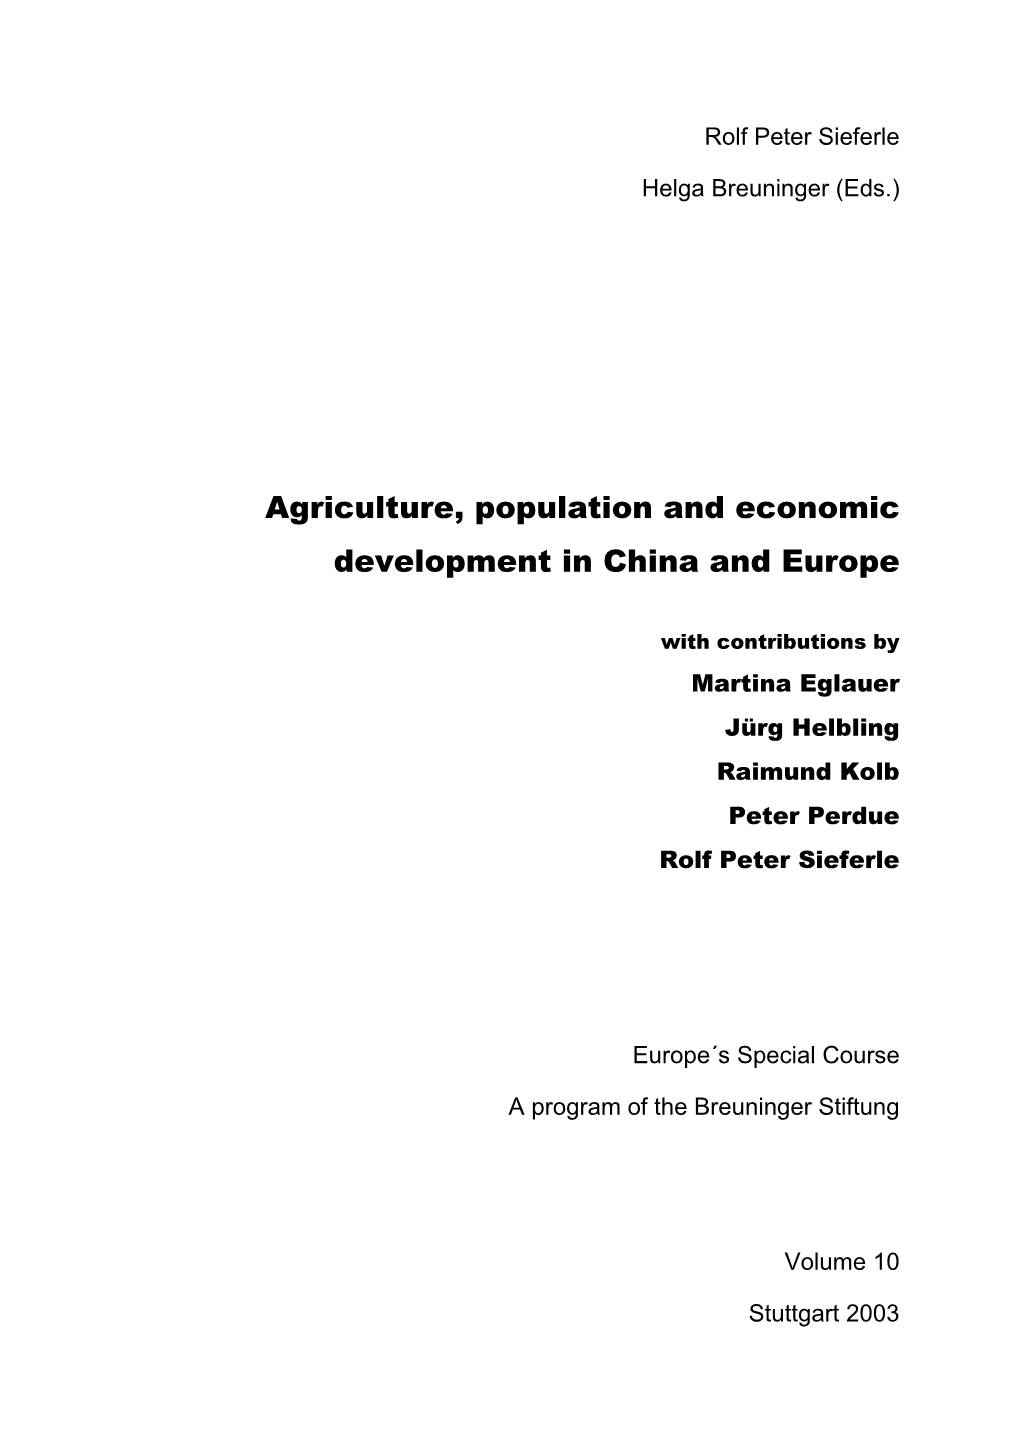 Agriculture, Population and Economic Development in China and Europe